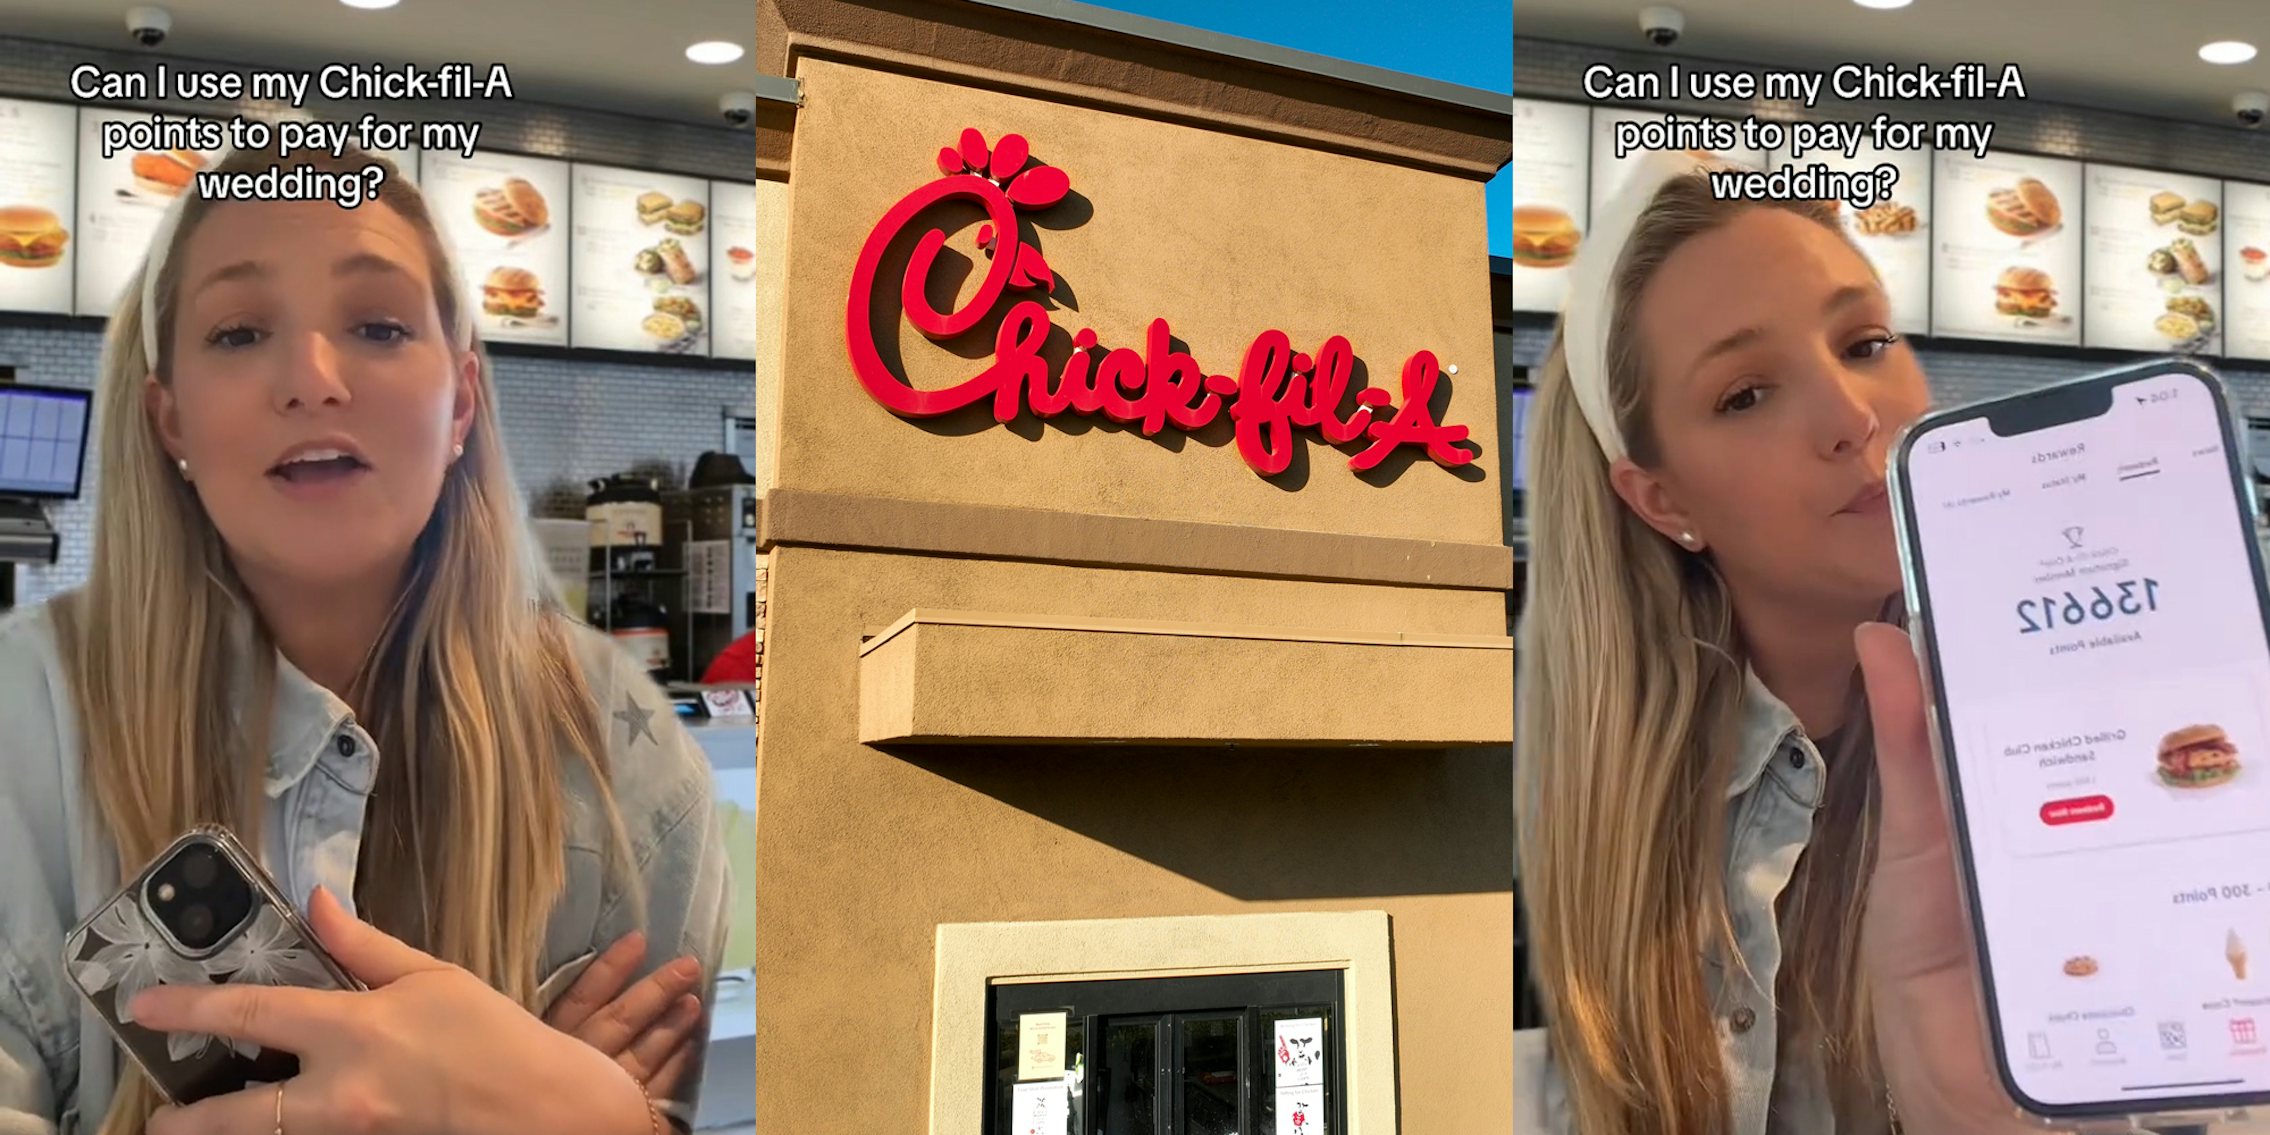 Chick-fil-A customer greenscreen TikTok over restaurant interior with caption 'Can I use my Chick-fil-A points to pay for my wedding?' (l) Chick-fil-A restaurant building with sign (c) Chick-Fil-A customer greenscreen TikTok holding phone over restaurant interior with caption 'Can I use my Chick-fil-A points to pay for my wedding?' (r)